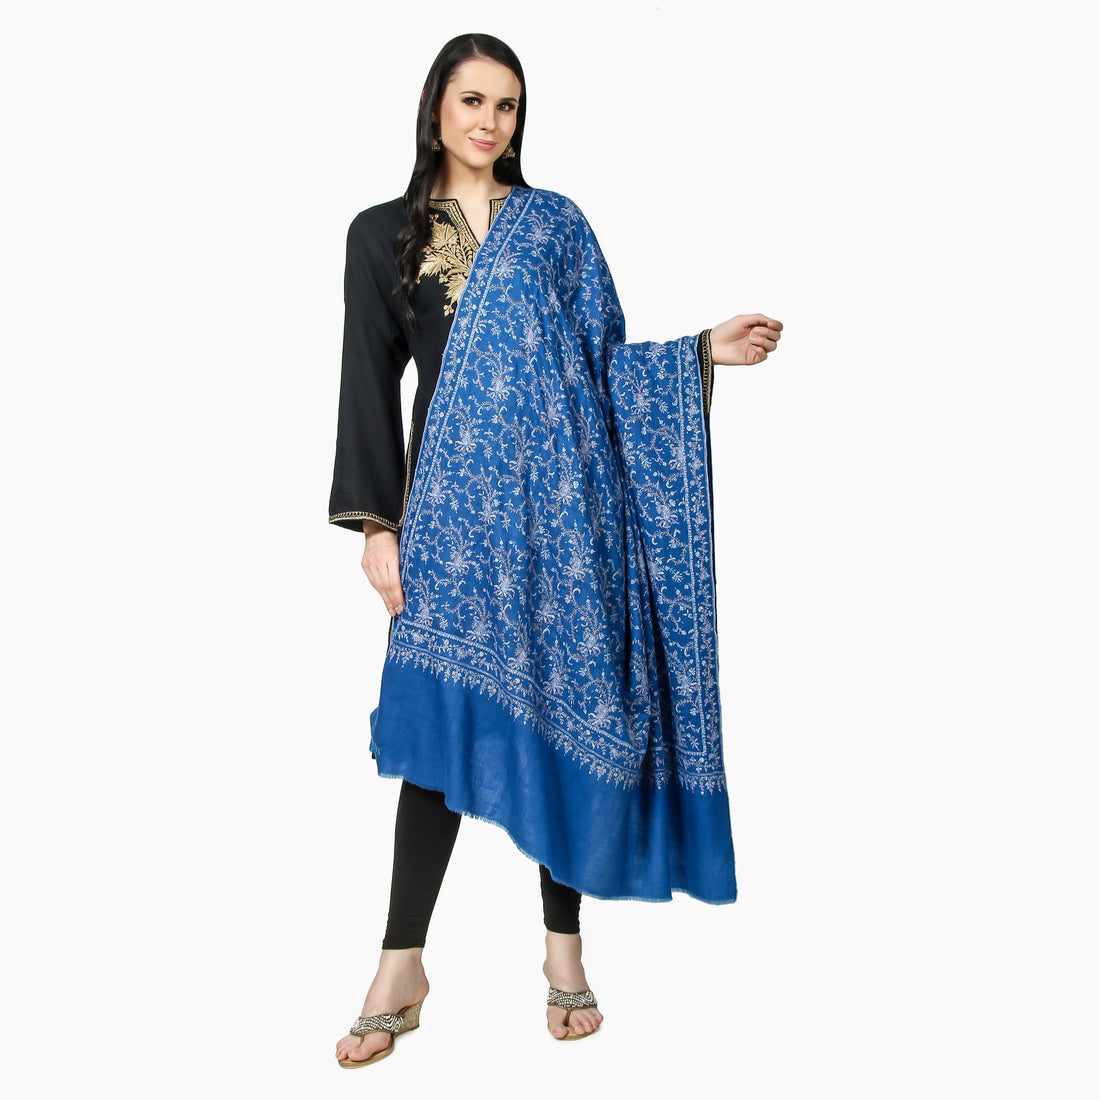 Adorn Any Occasion with Pashmina Shawls